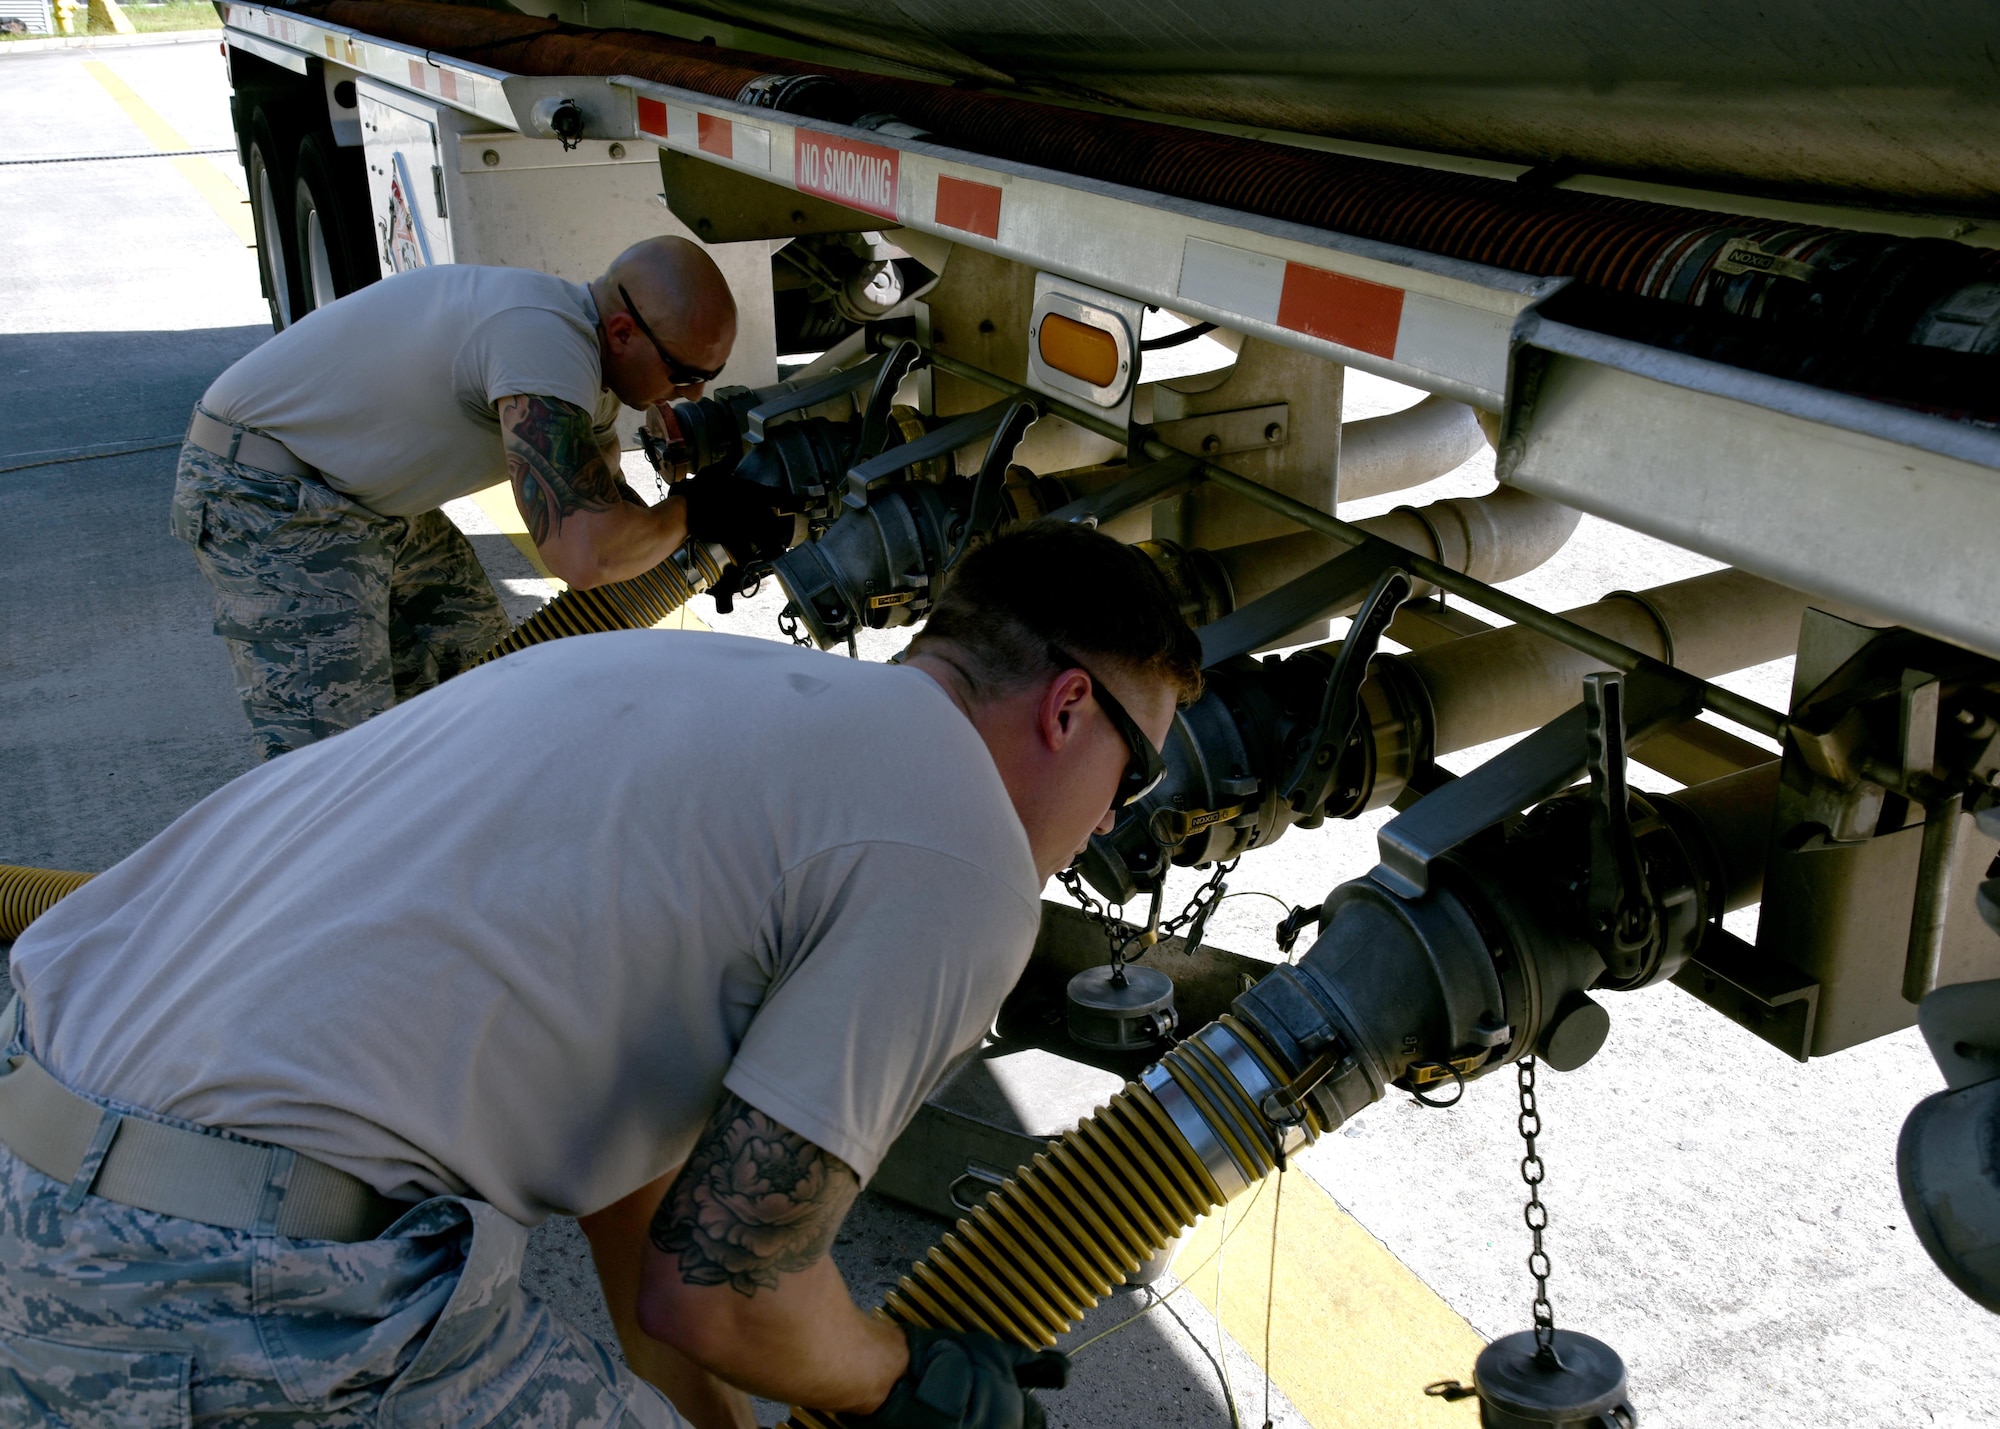 Fuels Distribution System Technicians, Staff Sgt. Justin Bradford, a volunteer from the 134th Air Refueling Wing, McGhee Tyson Air National Guard Base (left) and Staff Sgt. Jared Dabney, 165th POL, operate a truck offloading header valve to take fuel during a fuel delivery to the Savannah Air National Guard Base, Oct. 4, 2017.